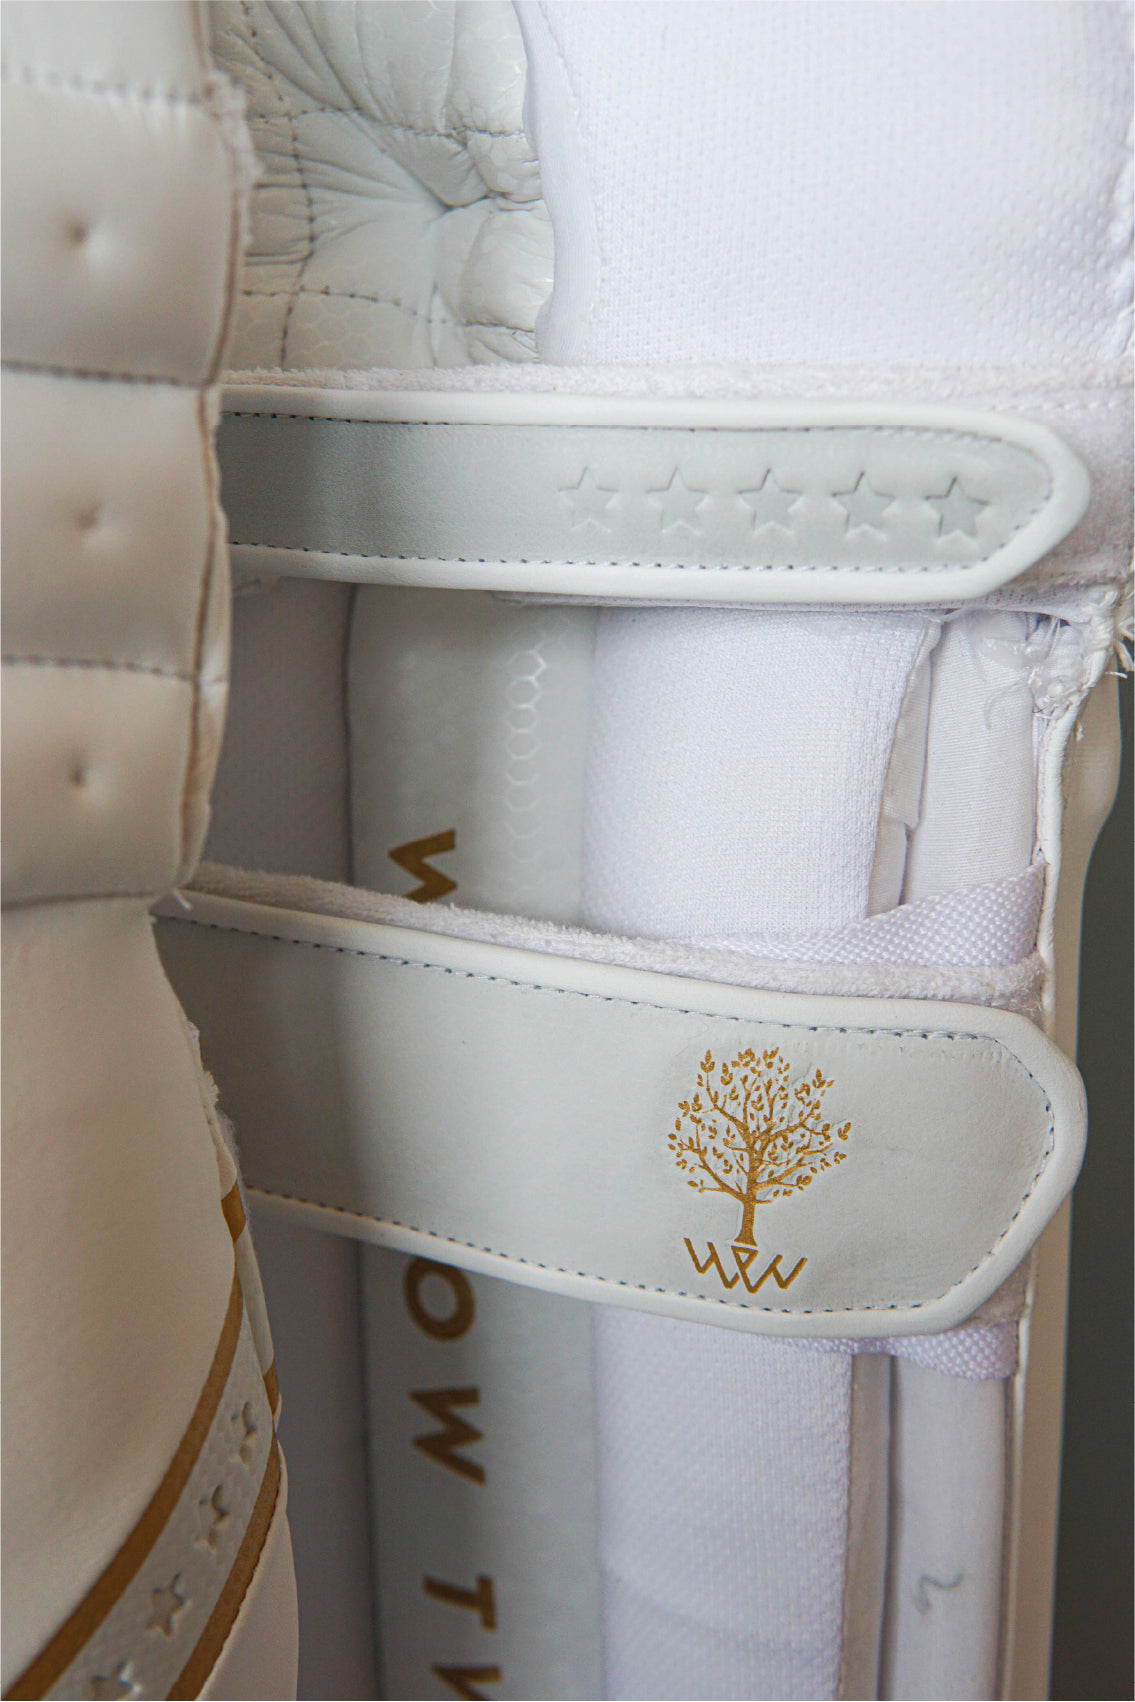 3 strip real leather embossed padded straps provide maximum comfort and stability